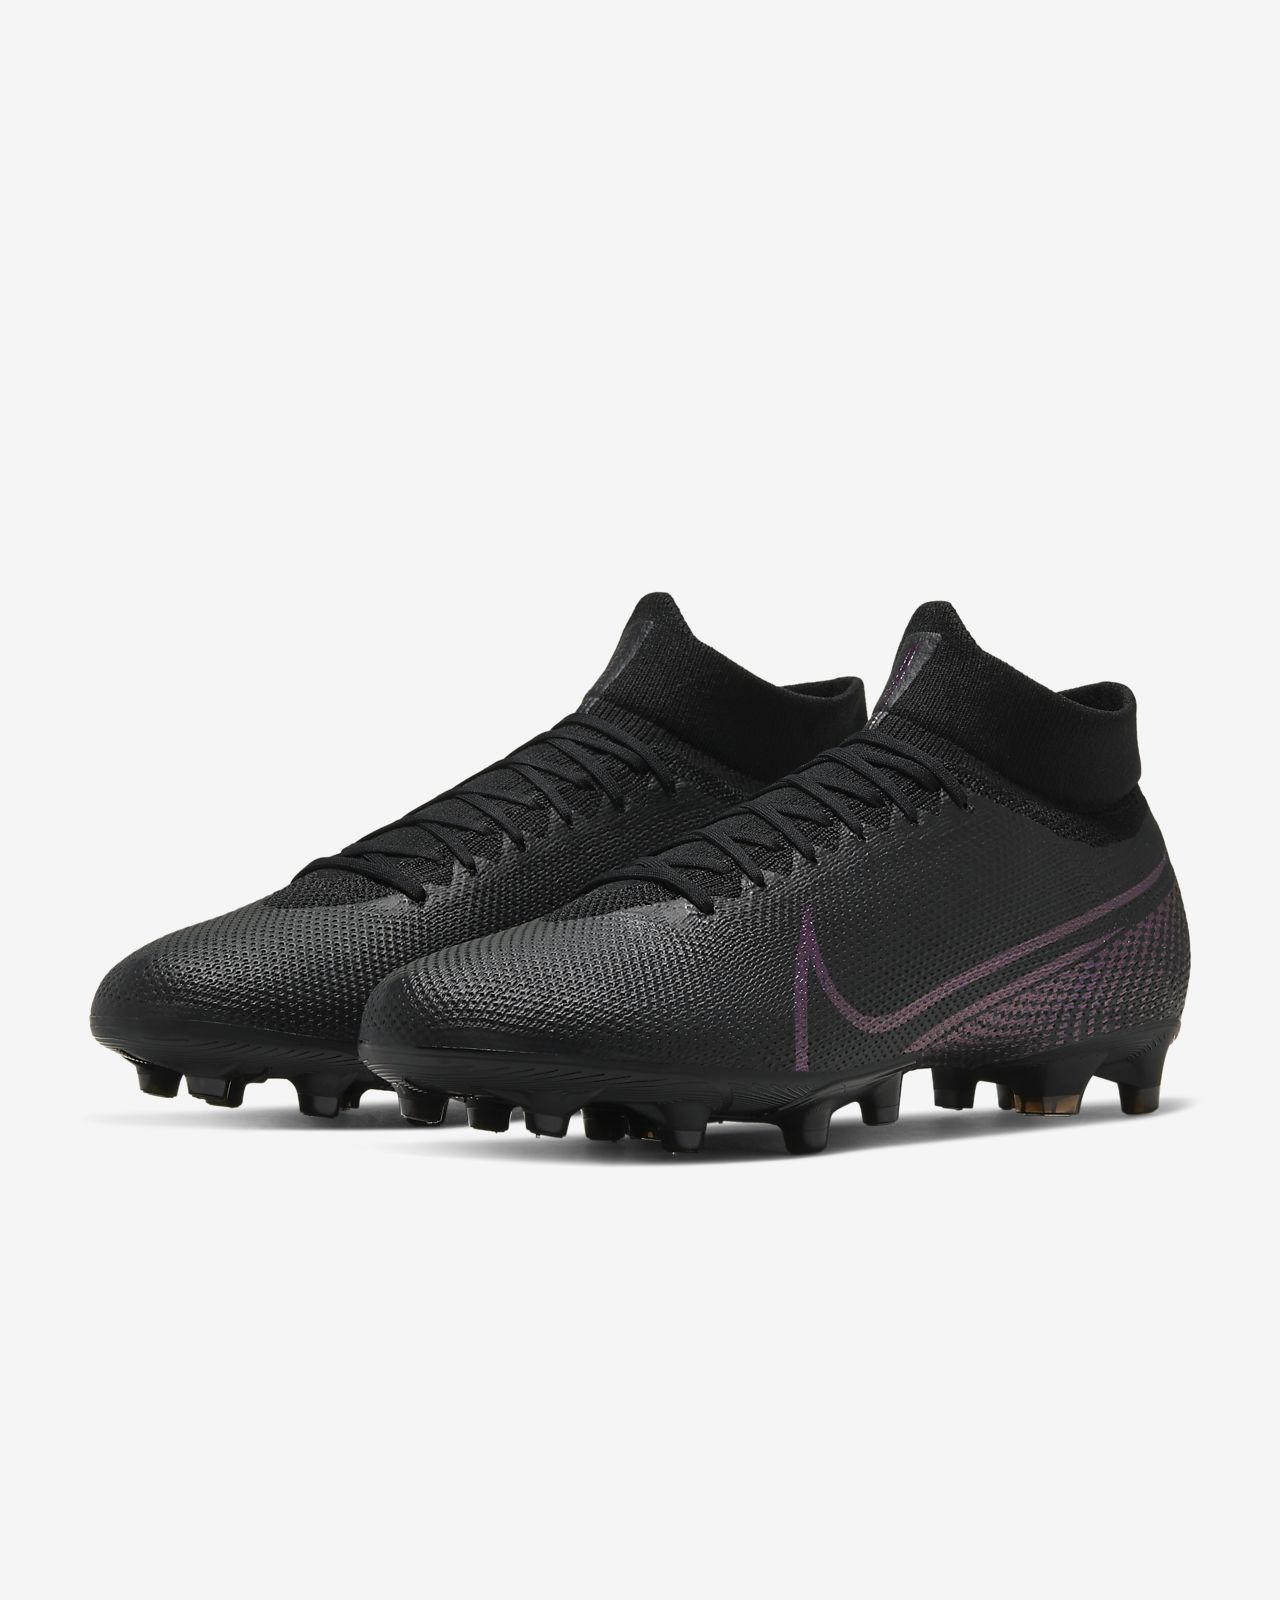 Nike Mercurial Superfly 7 Academy MDS MG Soccer Cleats.